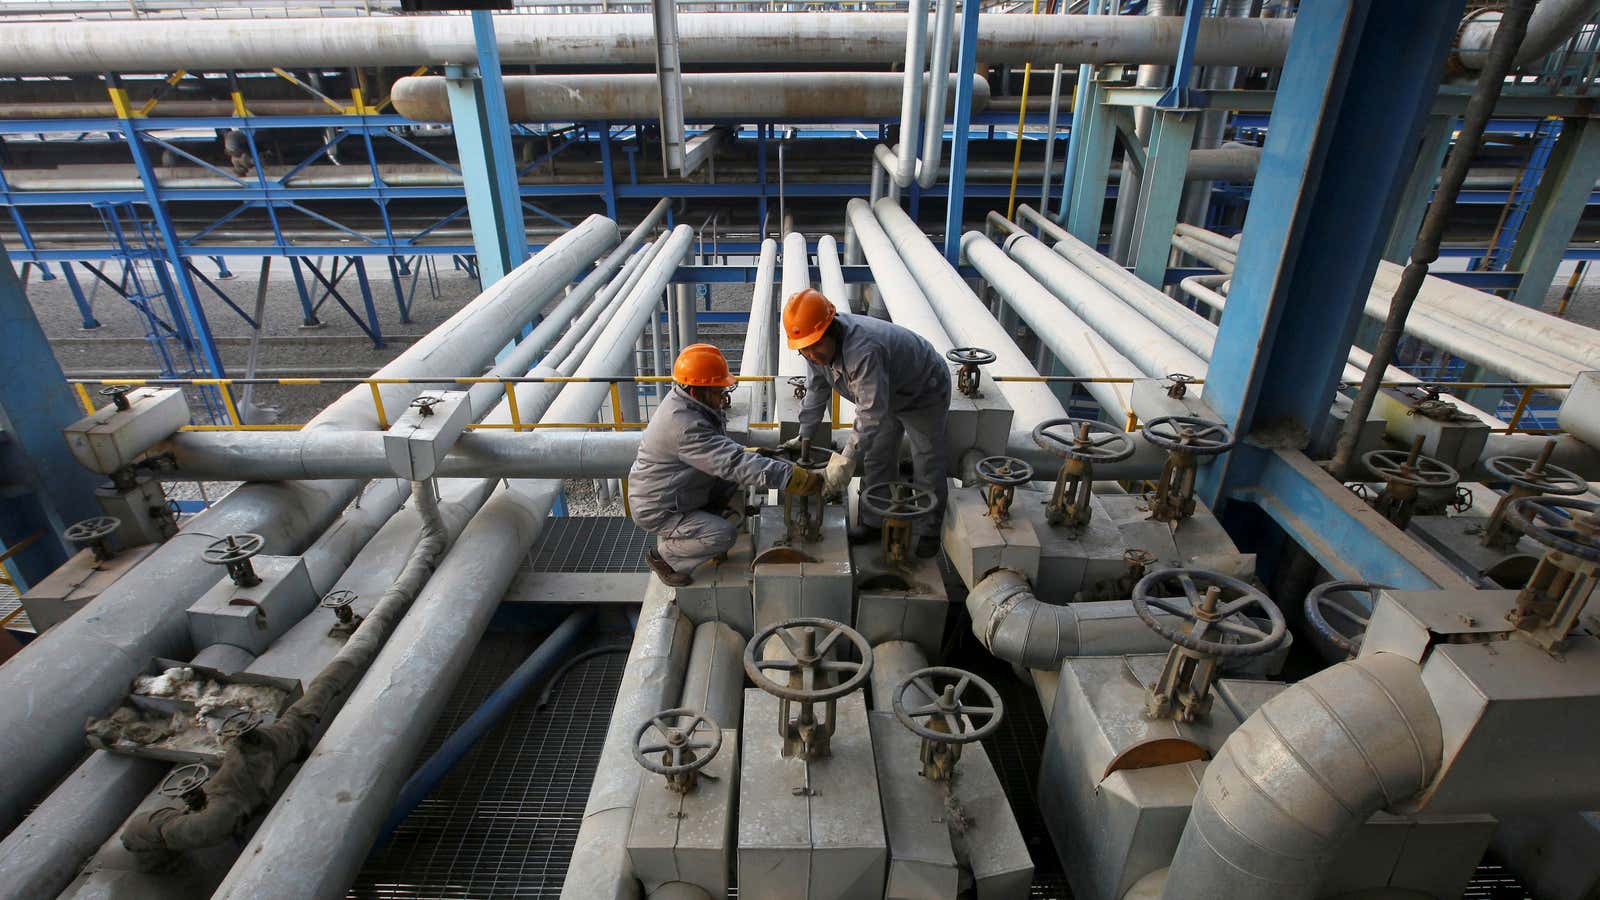 China incentivizes oil refineries to boost operations when the oil price is low, largely to support the domestic plastics industry.